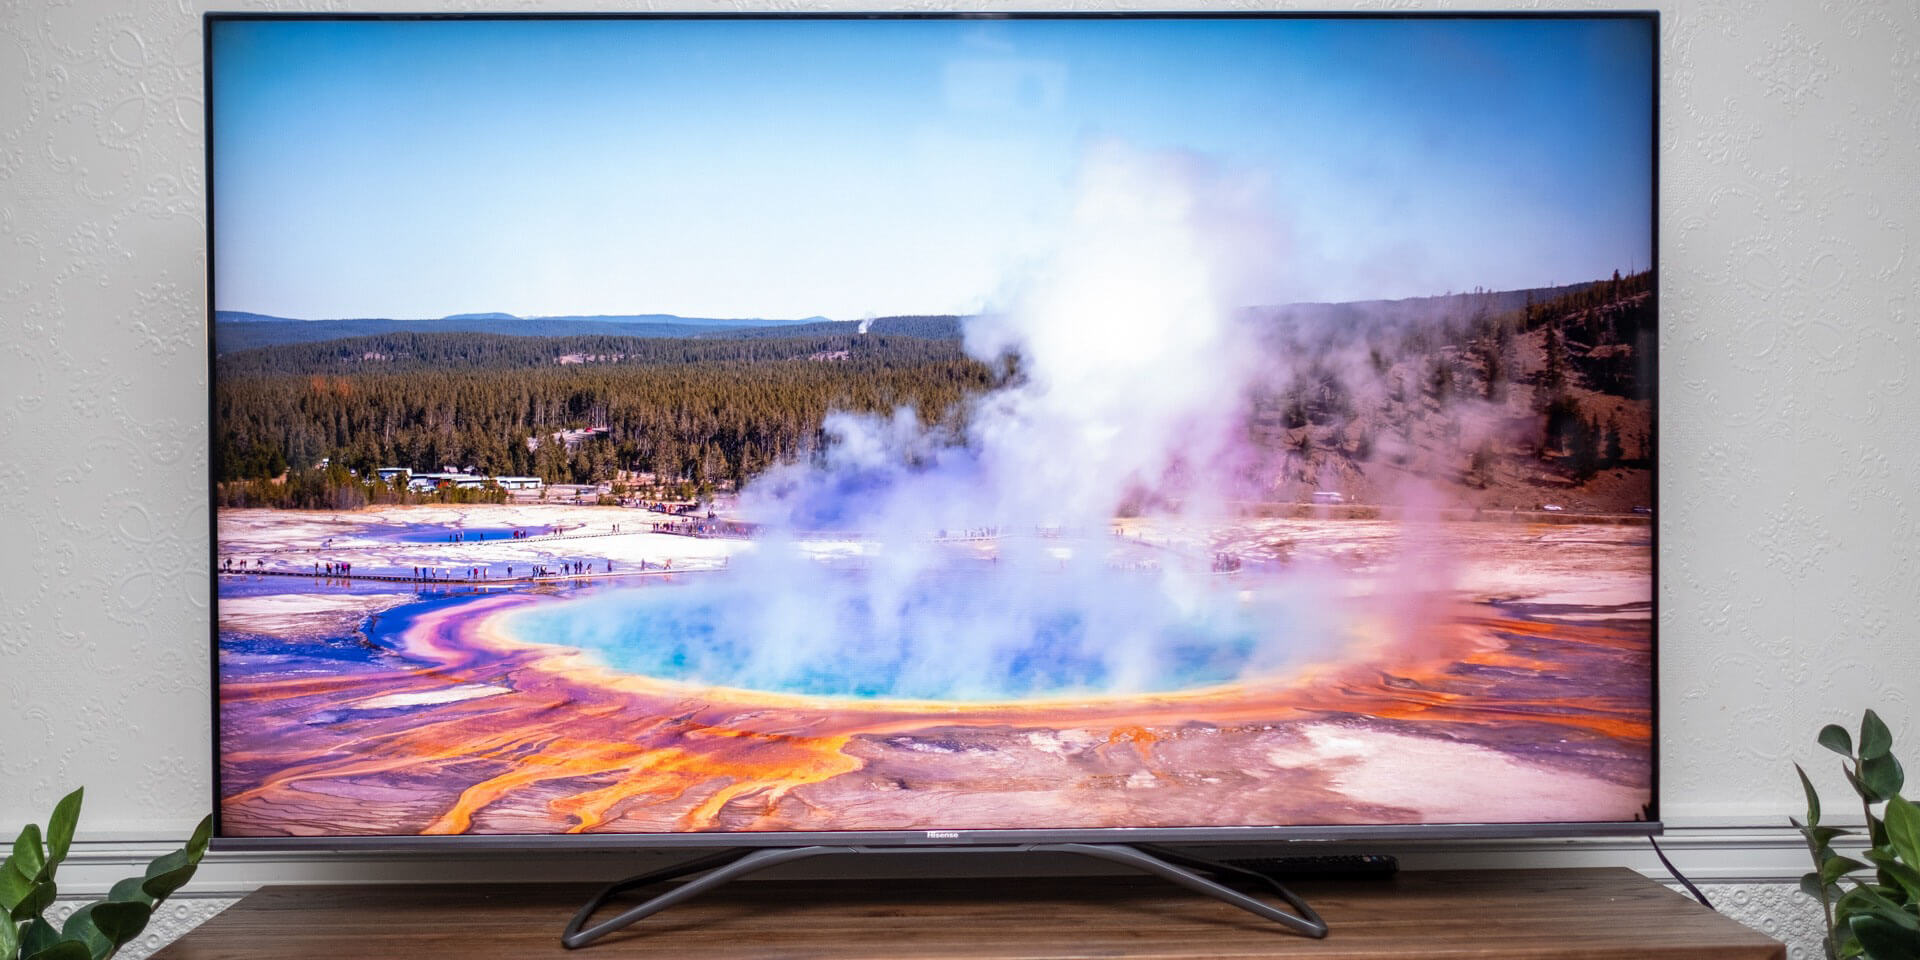 Can I use a 4K TV with non 4K receiver?